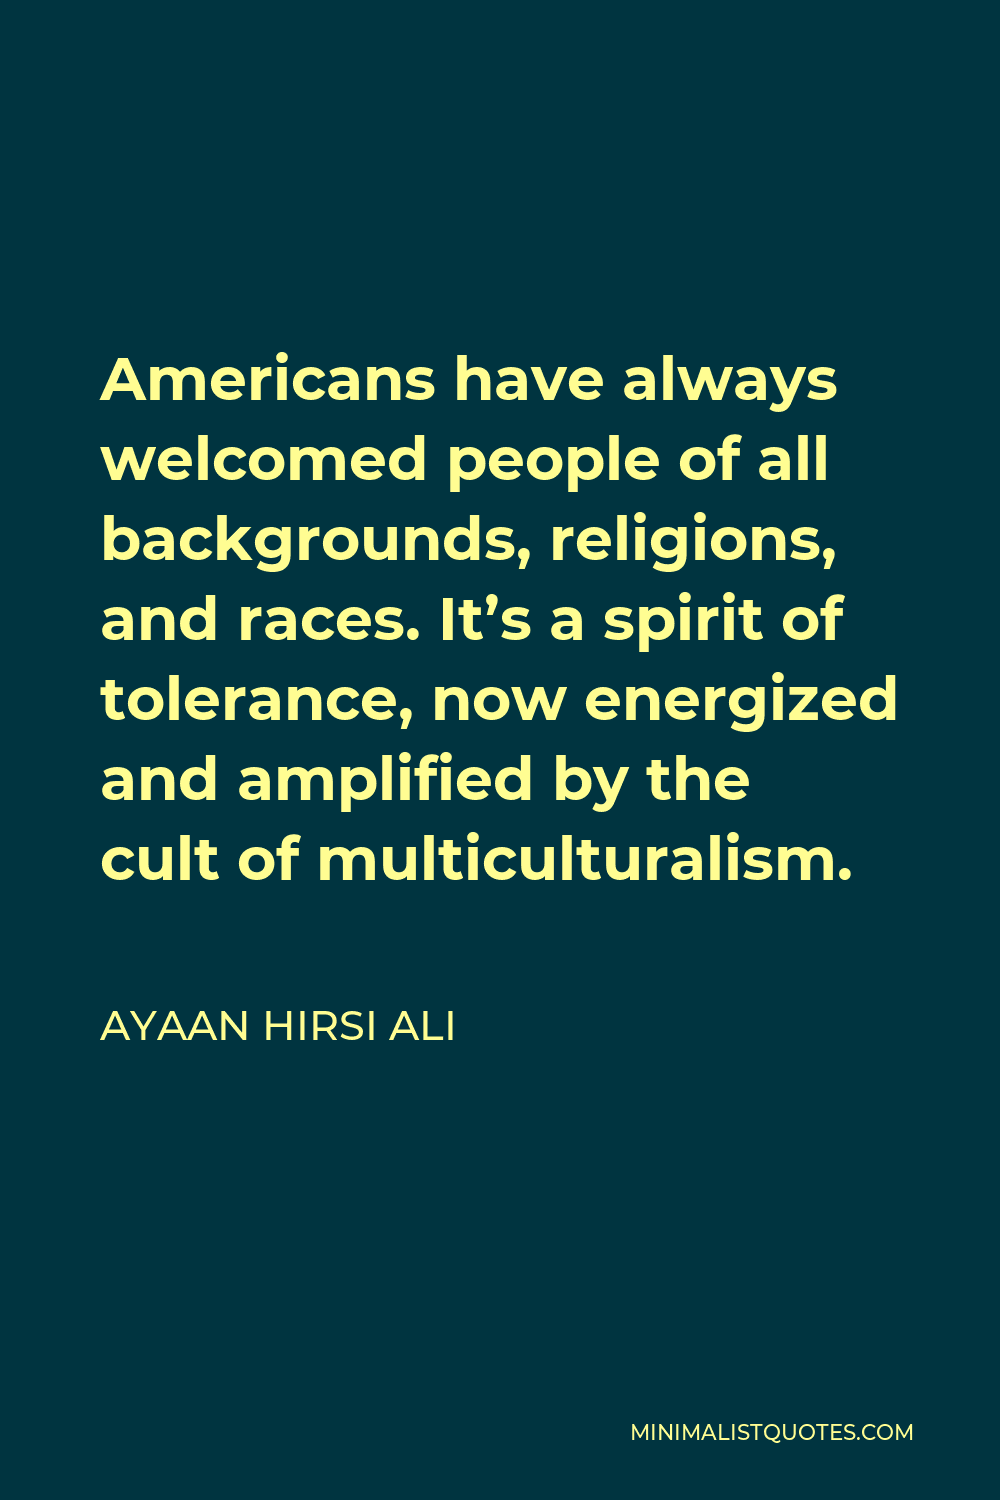 Ayaan Hirsi Ali Quote - Americans have always welcomed people of all backgrounds, religions, and races. It’s a spirit of tolerance, now energized and amplified by the cult of multiculturalism.